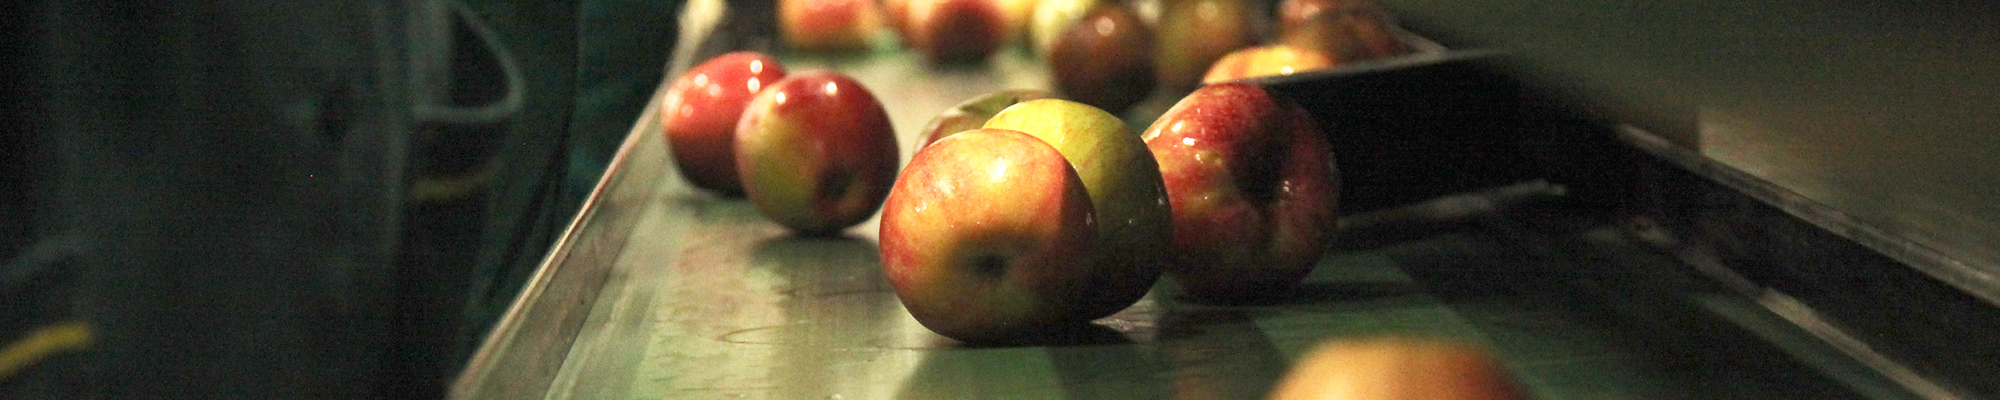 Apples on a processing line